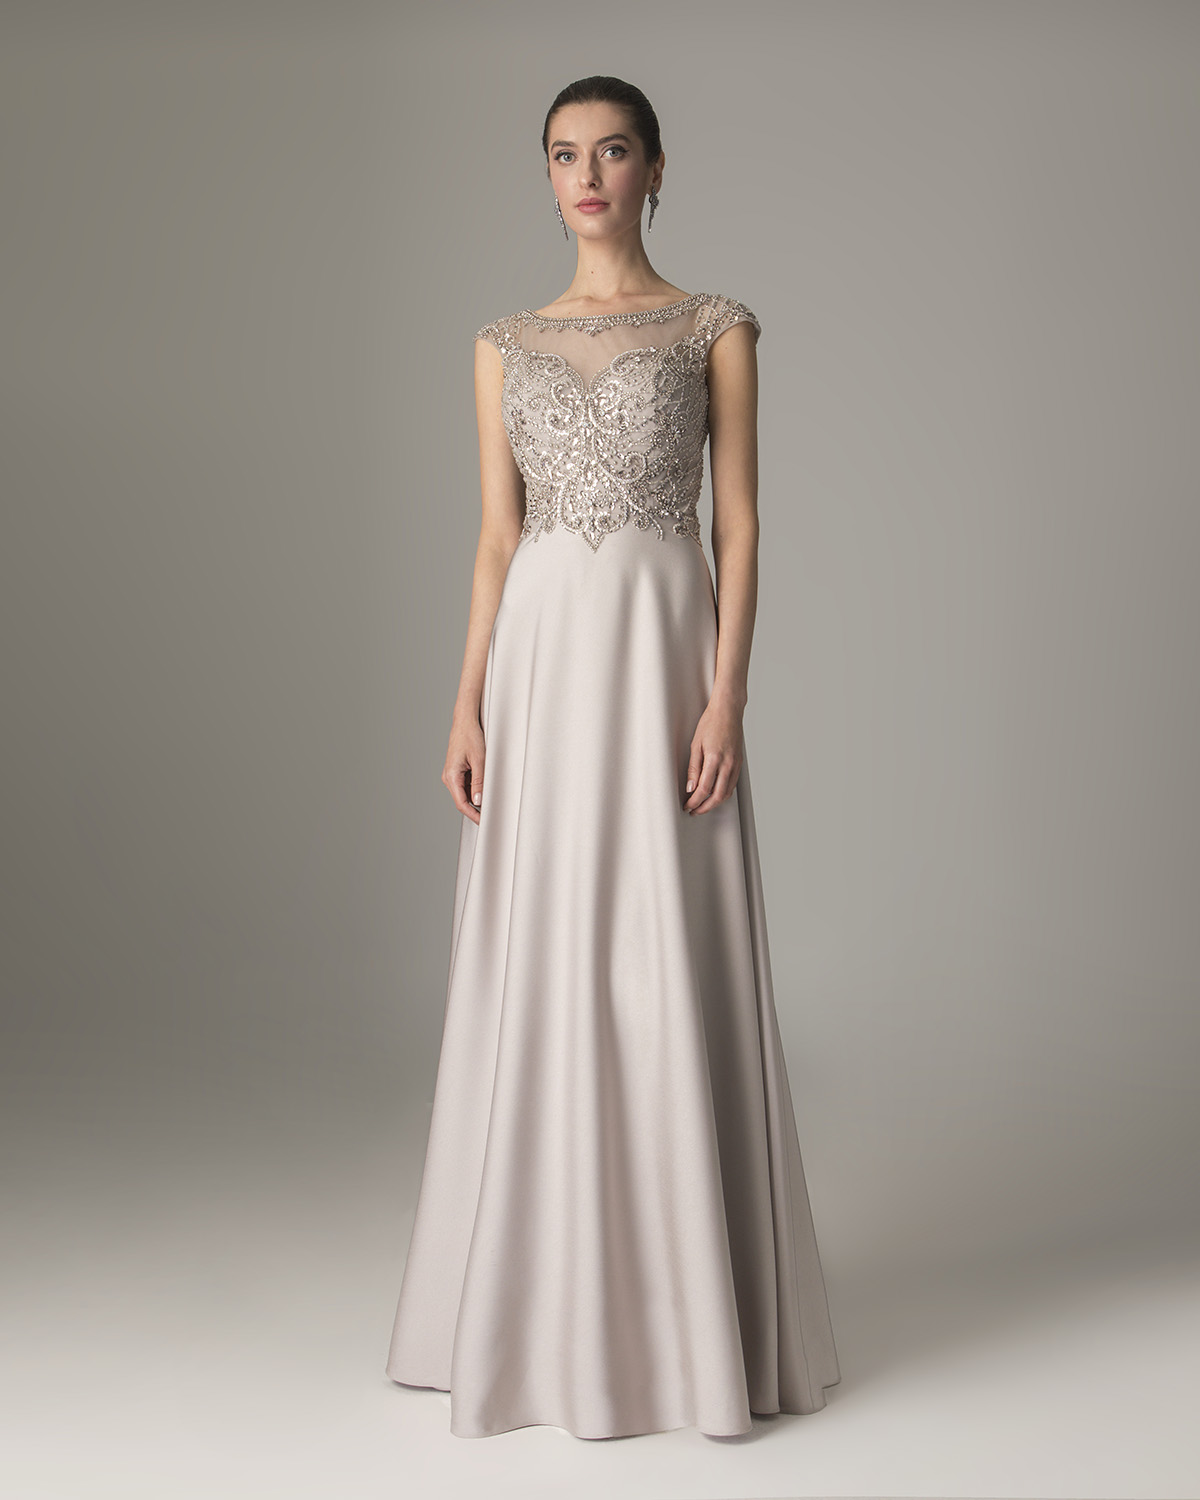 Classic Dresses / Long satin dress with fully beaded top